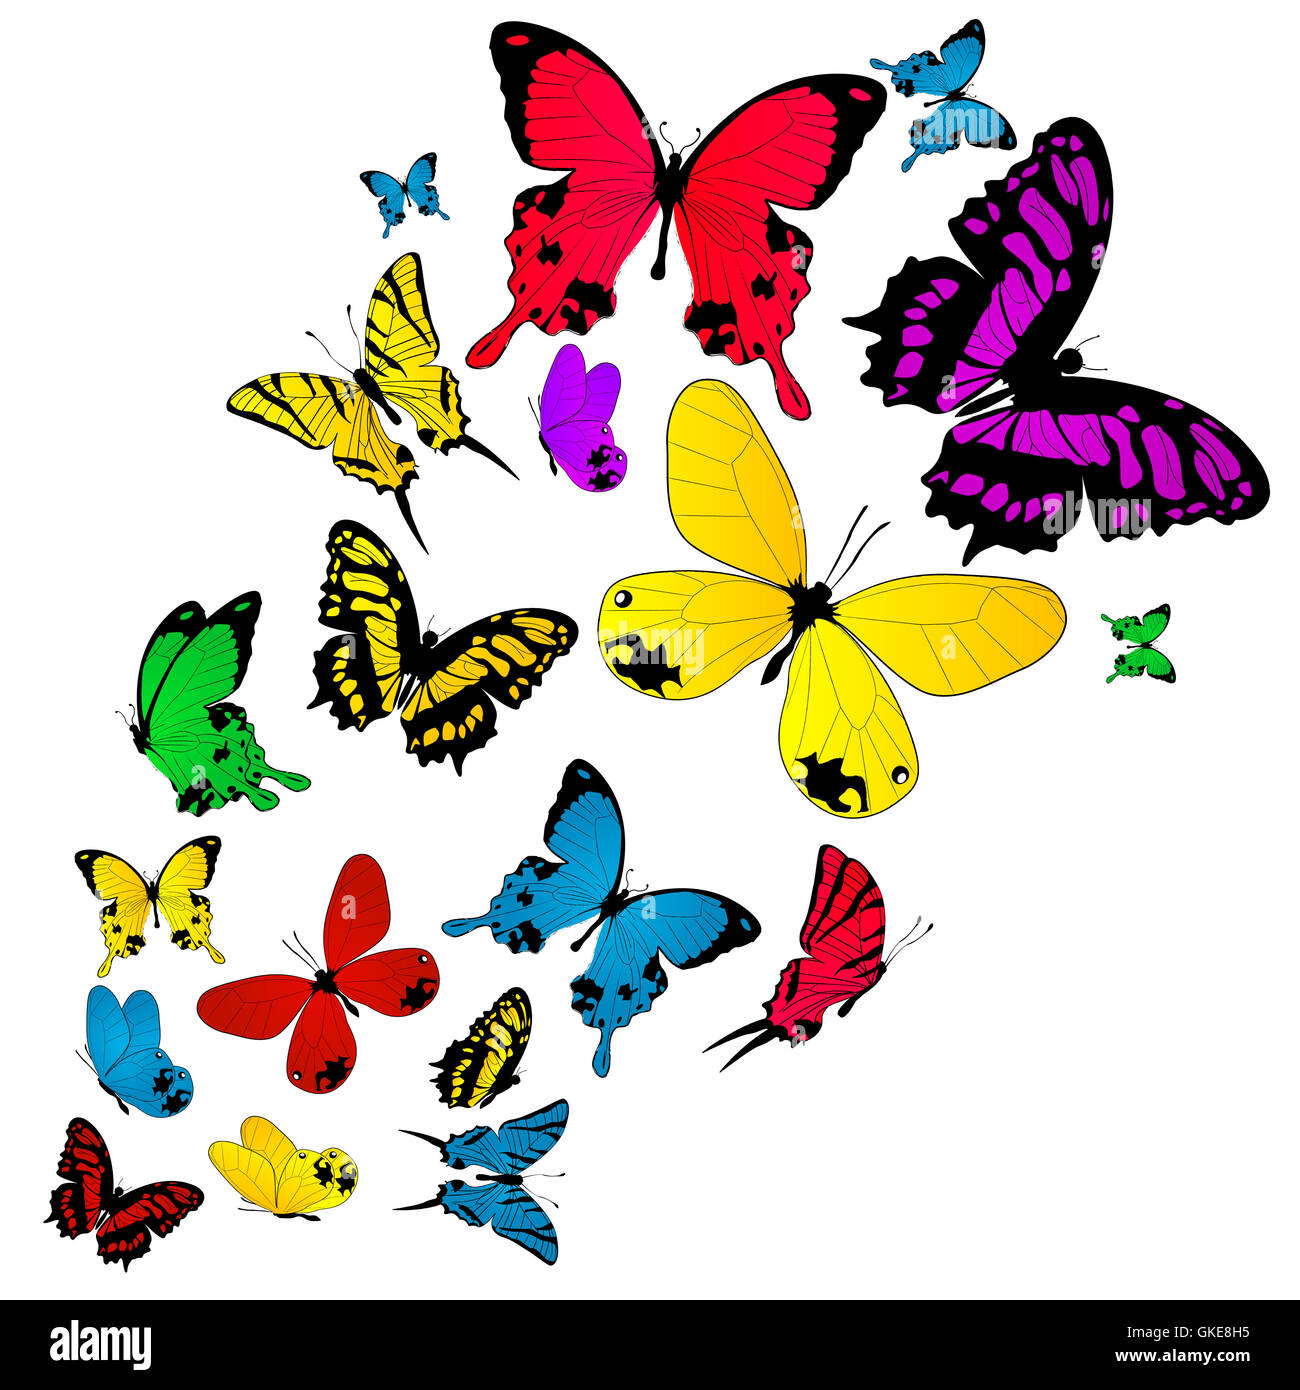 Colored butterflies background Stock Photo